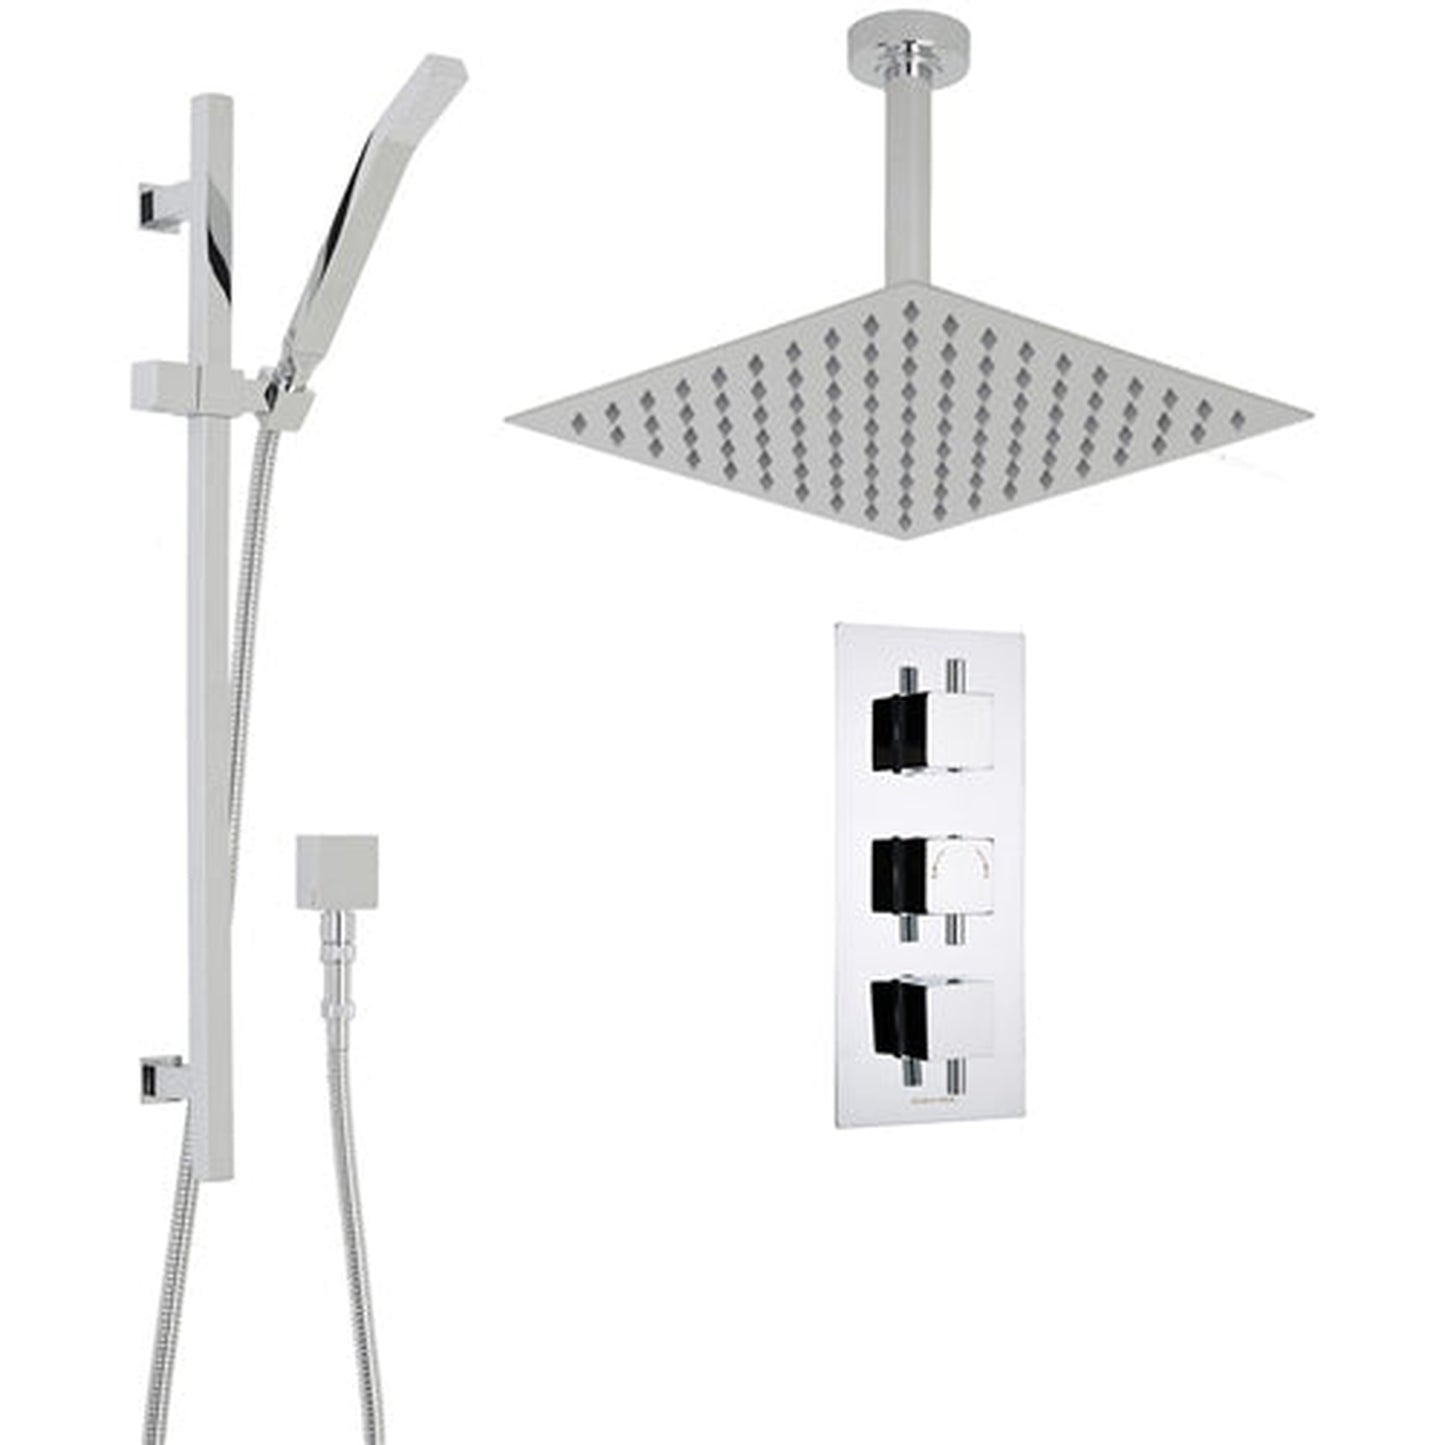 Fontana Liverpool 8" Chrome Square Ceiling Mounted Thermostatic Rainfall Shower System With Hand Shower and Without Water Powered LED Lights